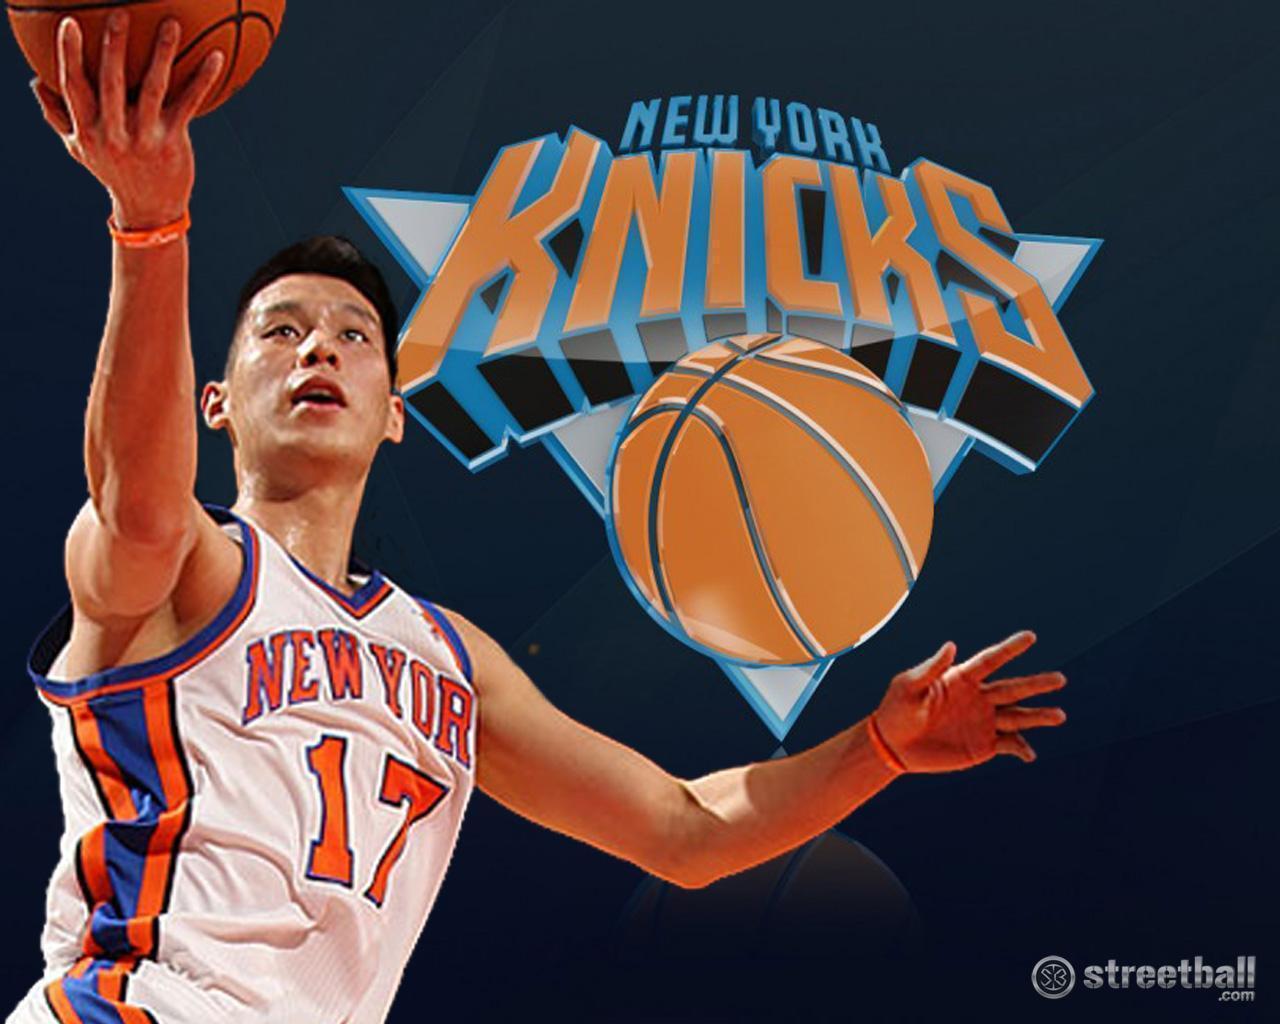 Jeremy lin Wallpapers